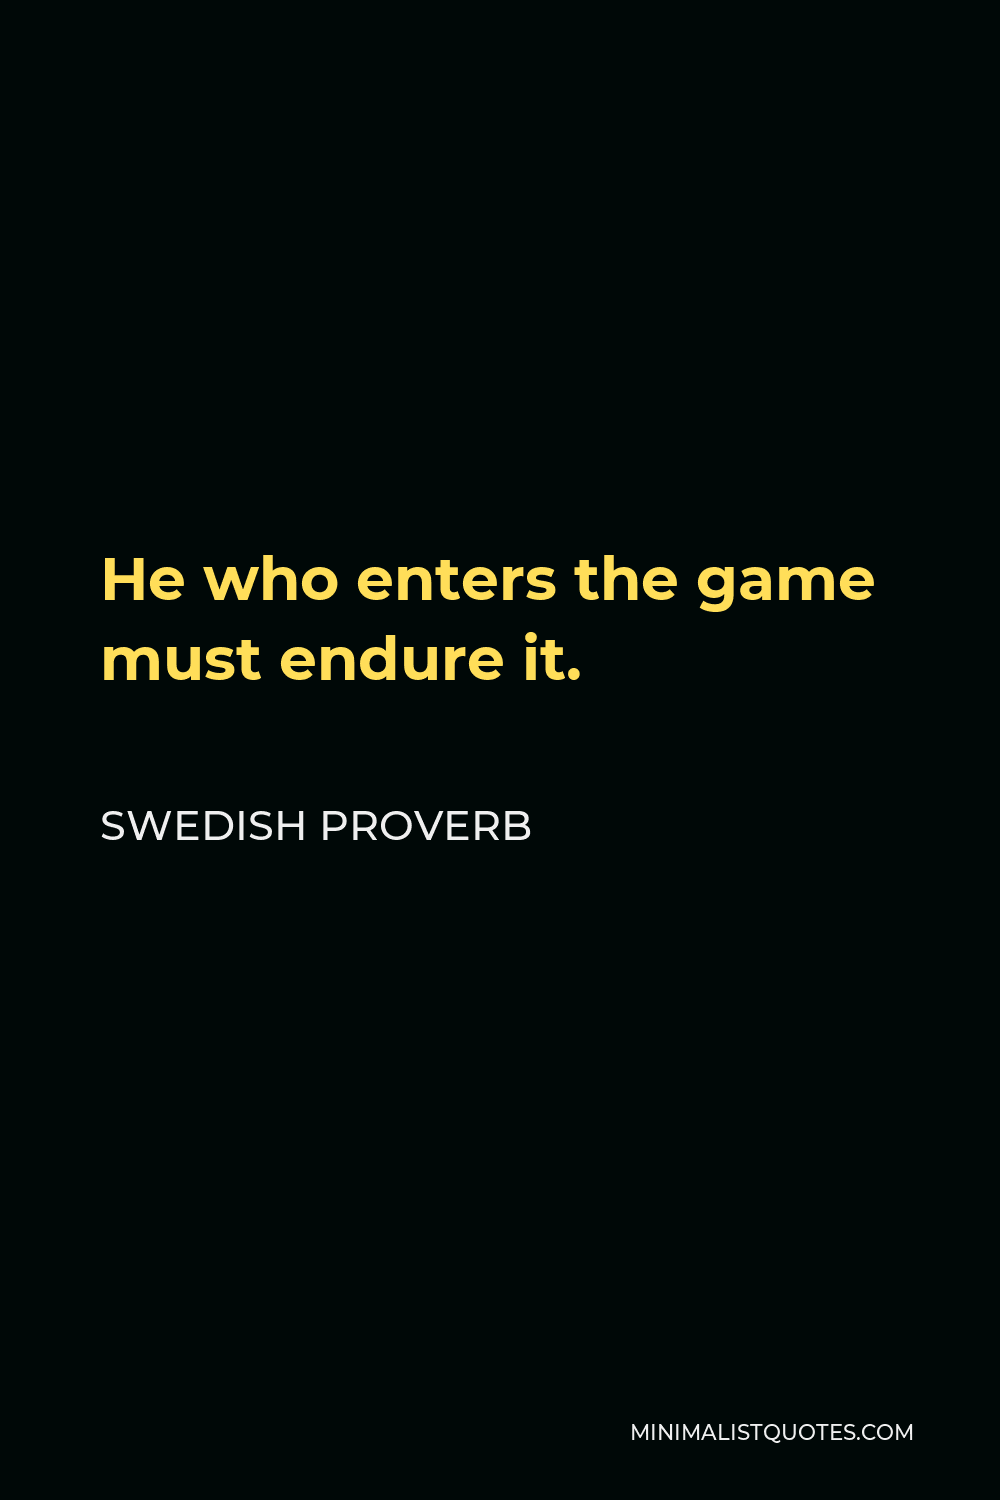 Swedish Proverb Quote - He who enters the game must endure it.